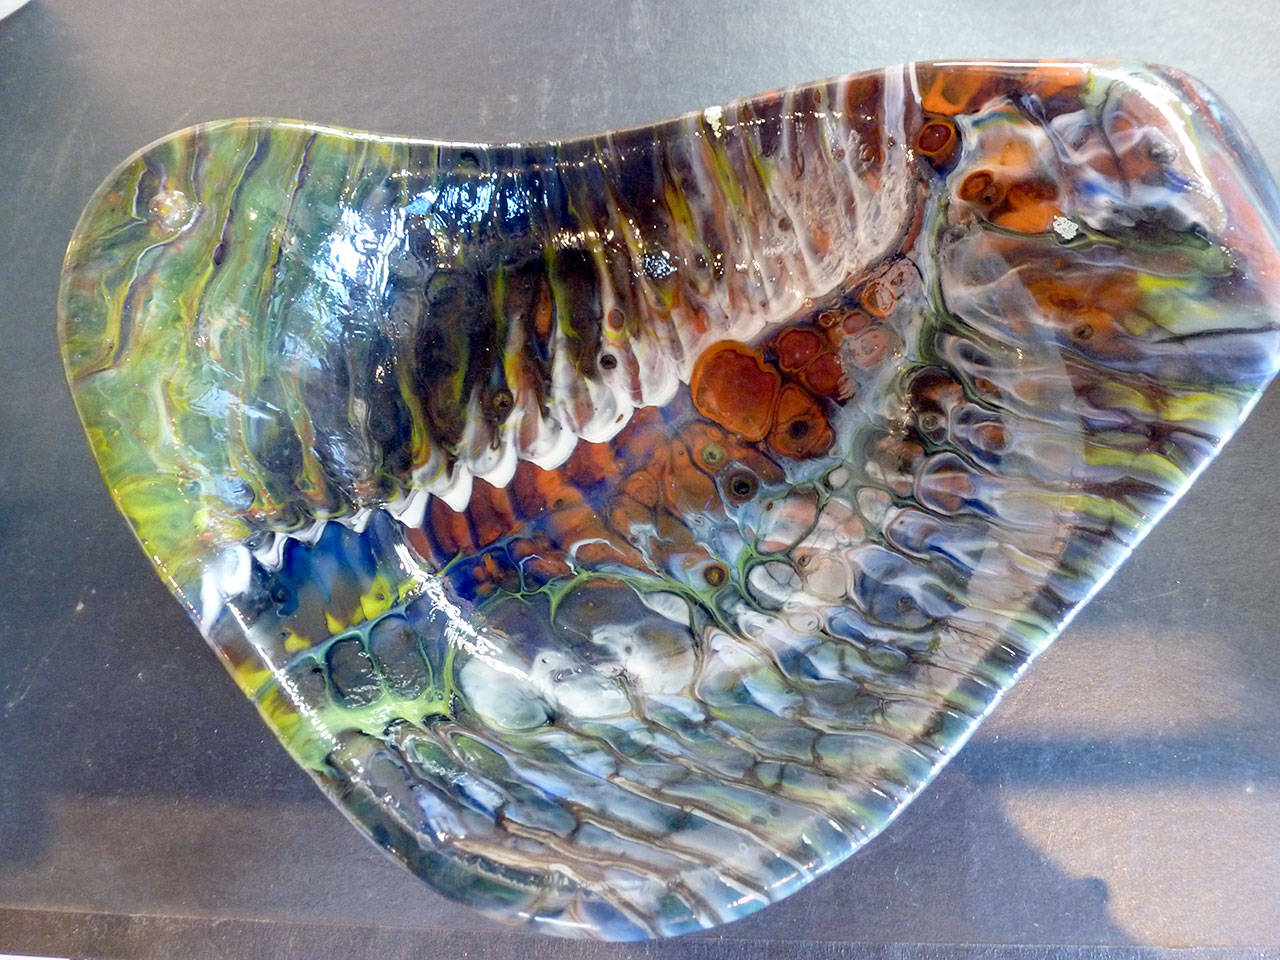 Susan Kantowitz’s glass fused art will be on display at Harbor Art, 110 E. Railroad Ave., during the Second Weekend Art Walk in Port Angeles. (Bob Stokes)